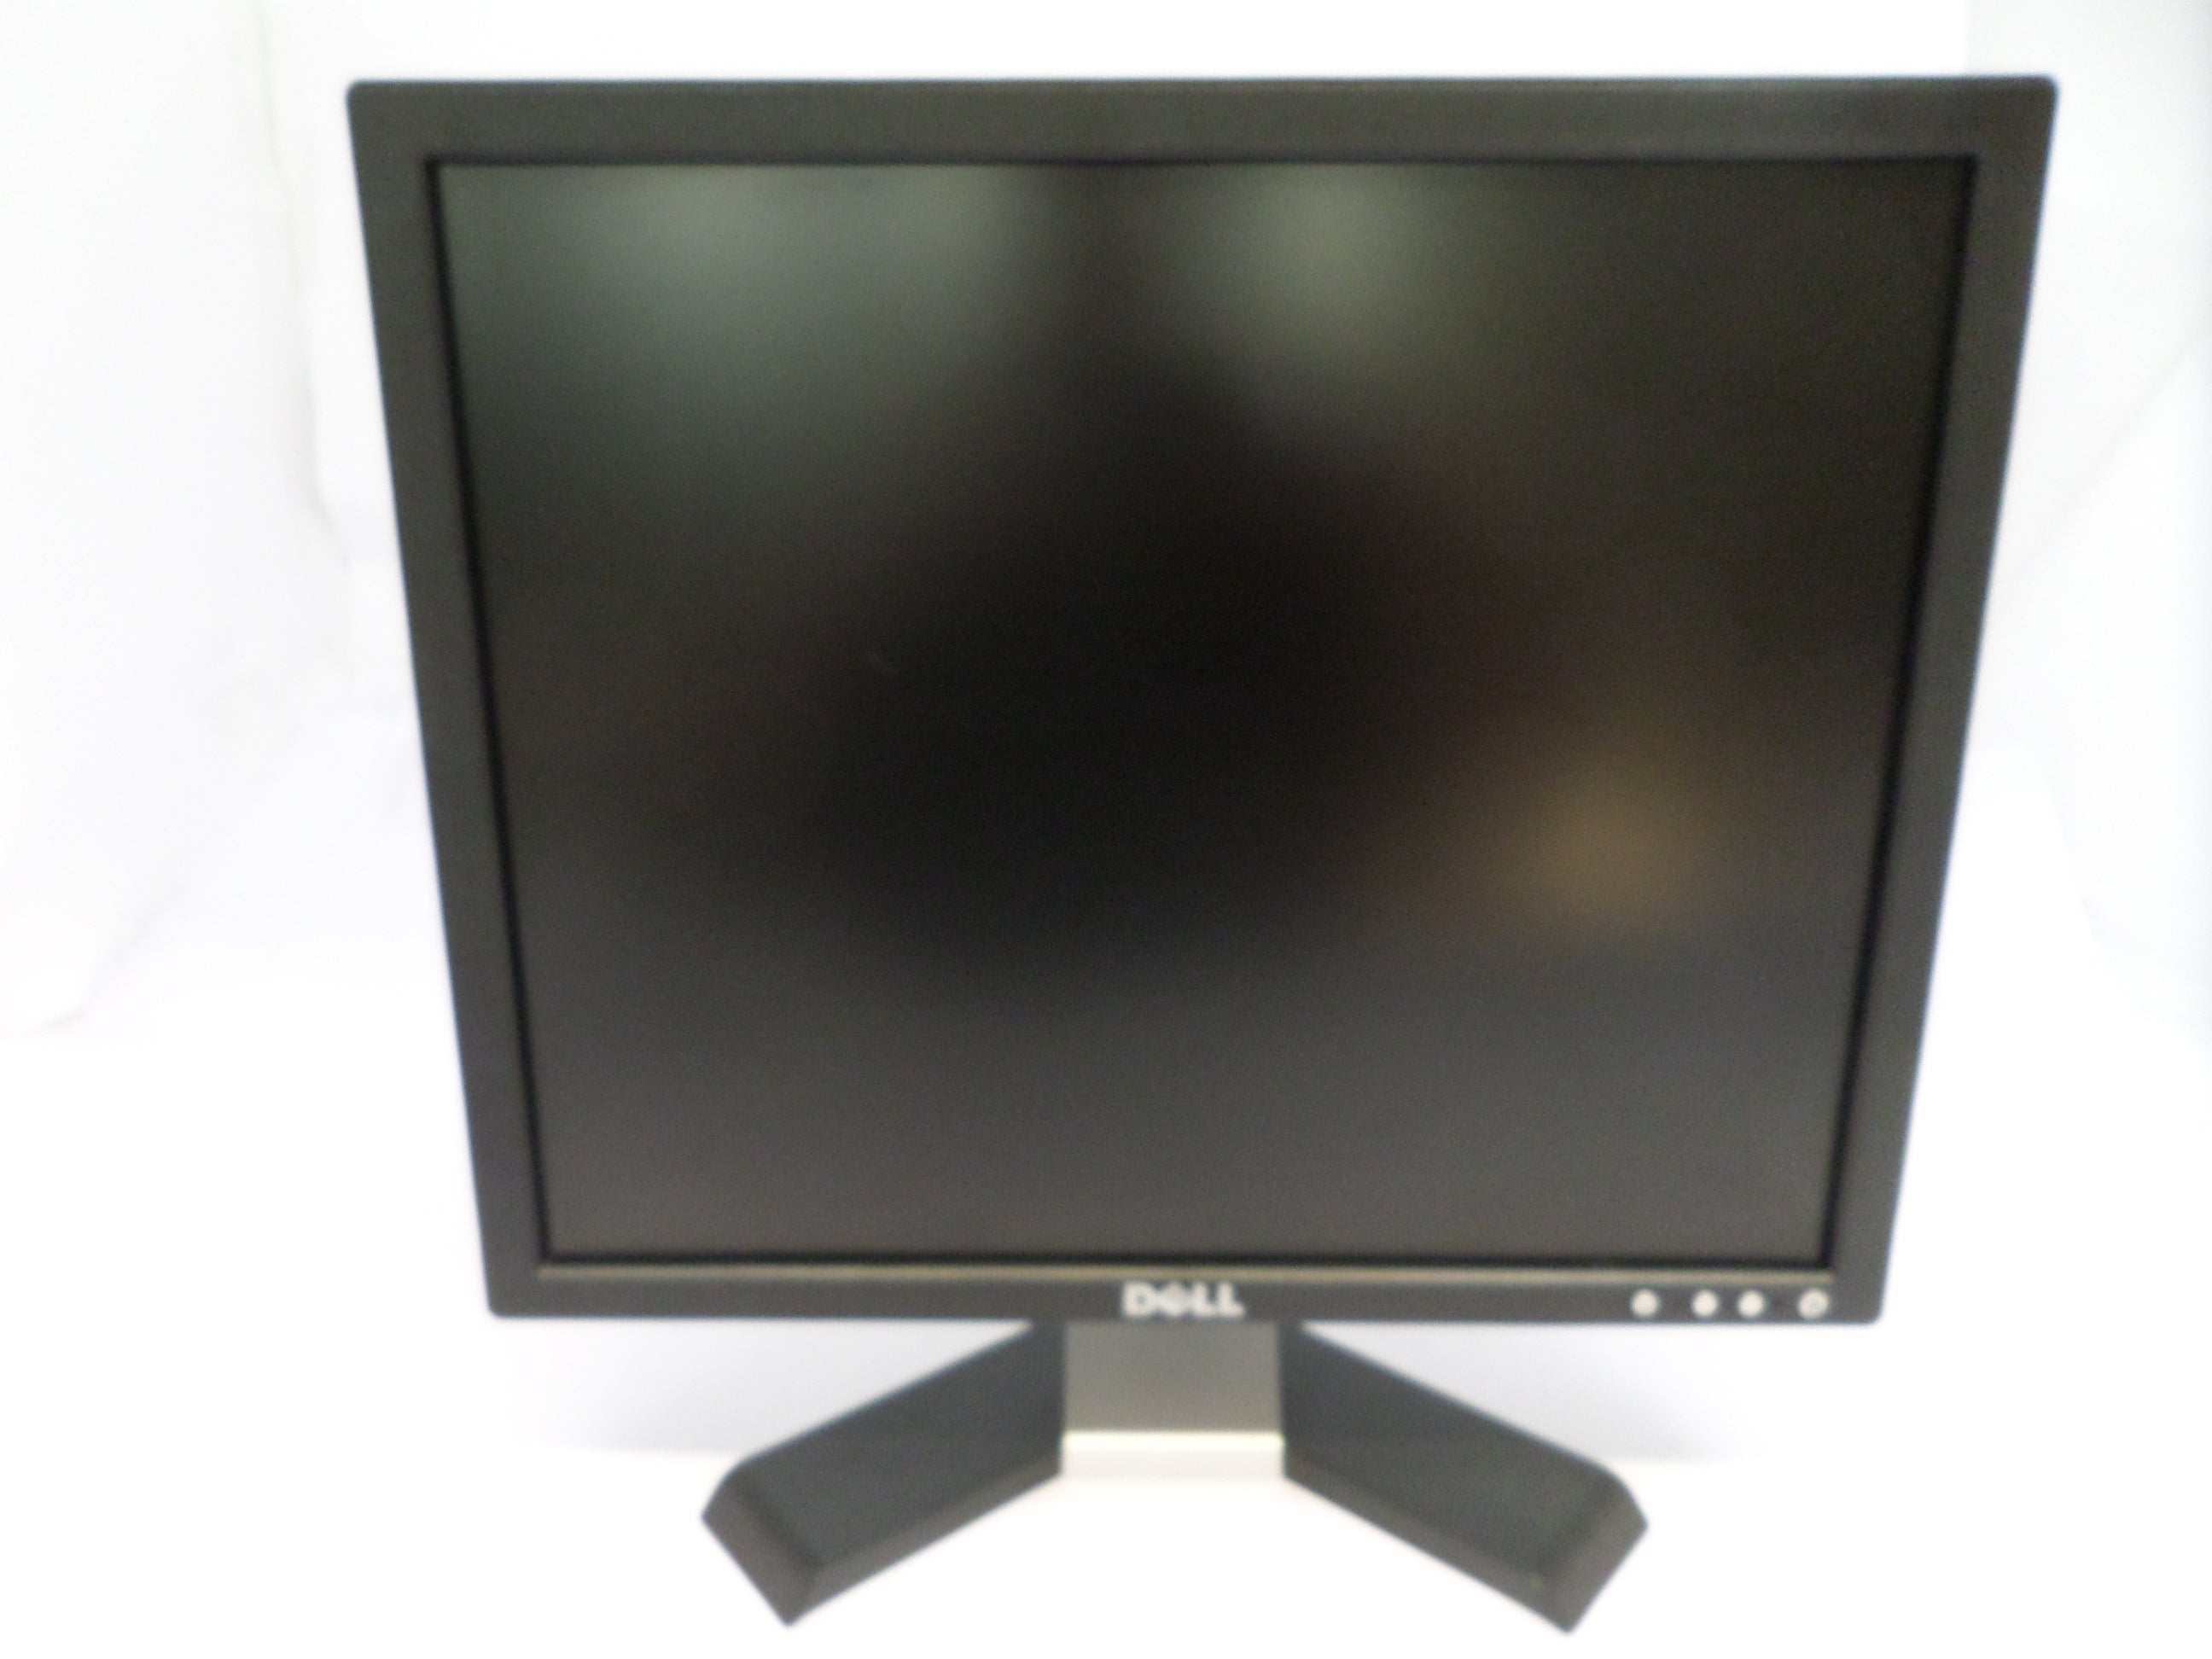 0XP279 - Dell 17" Color LCD Monitor - Refurbished